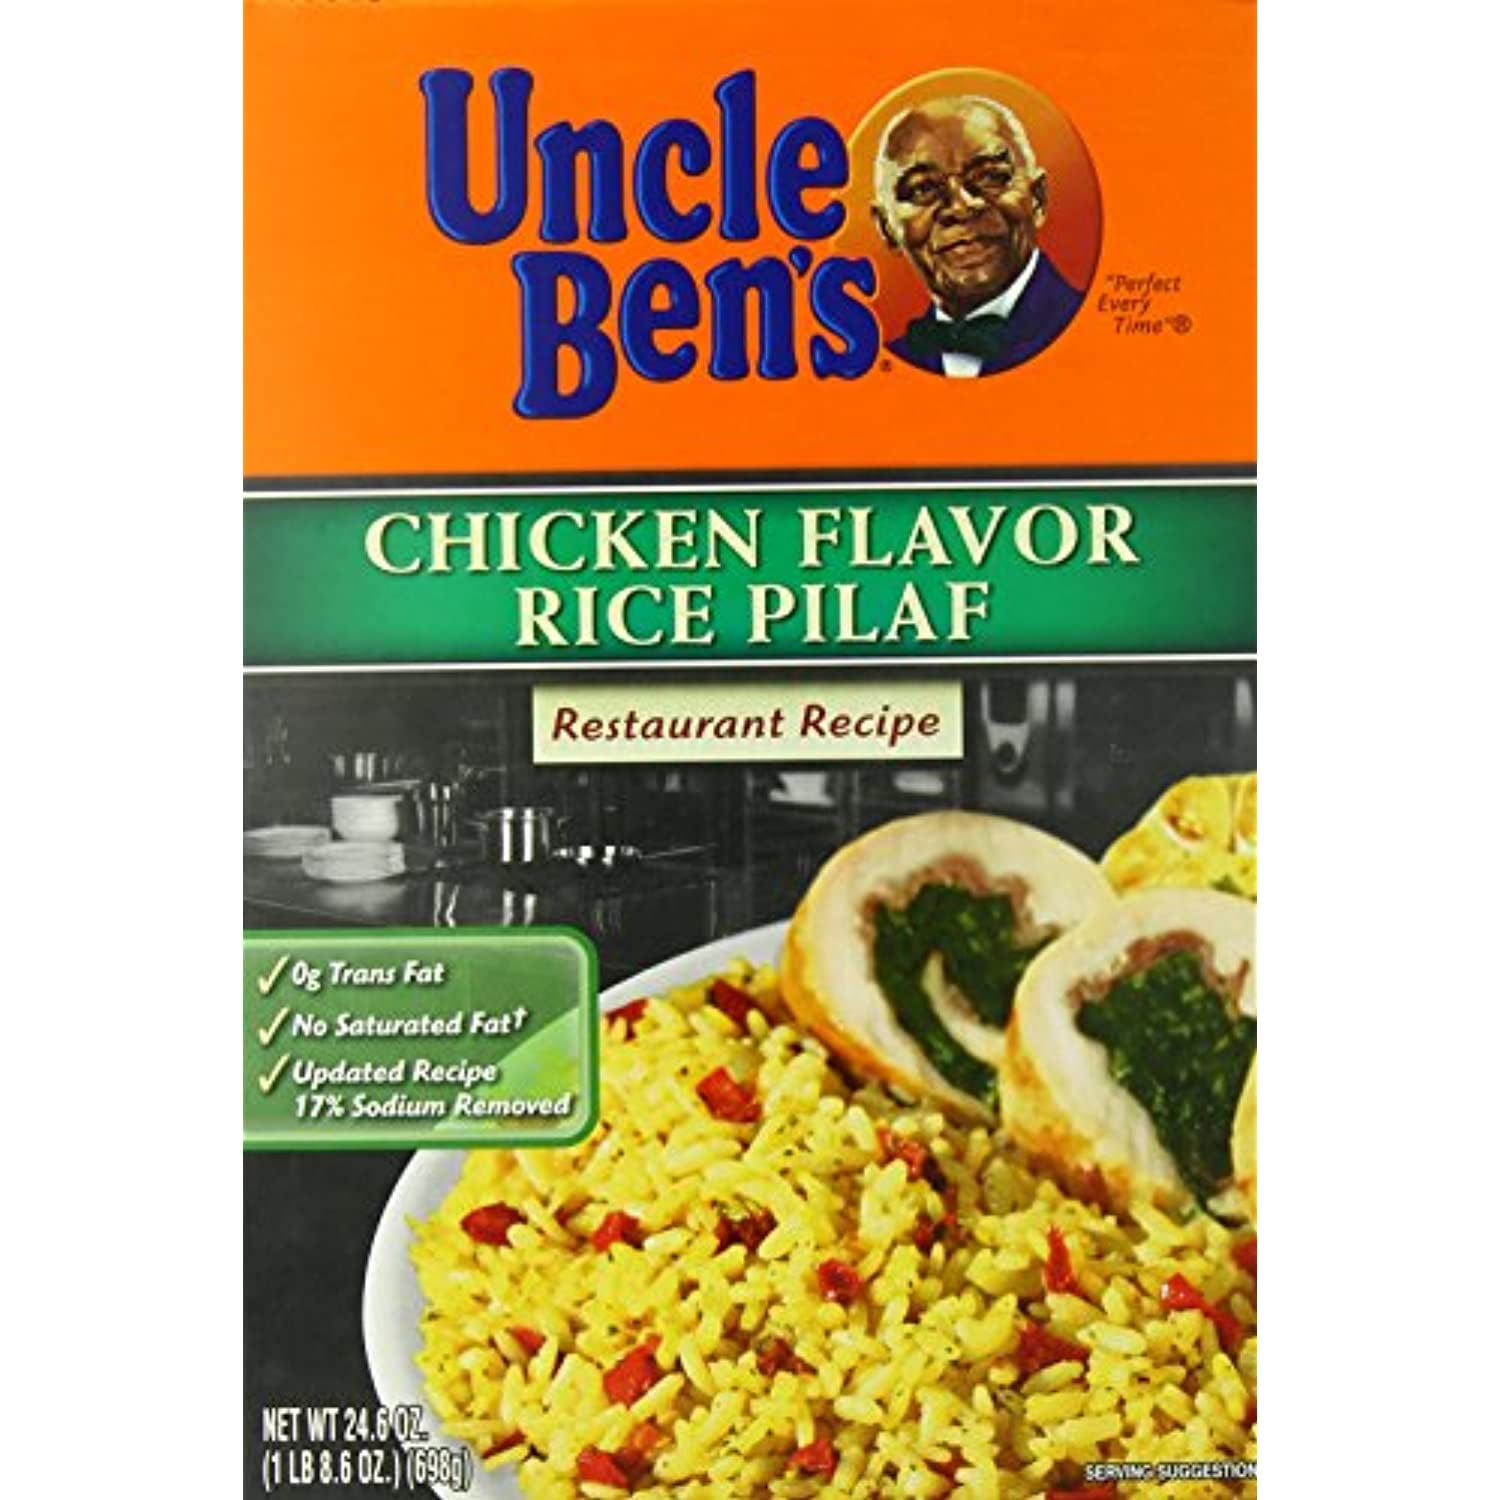 Uncle Bens Chicken Flavor Rice Pilaf, 24.6 Ounce 